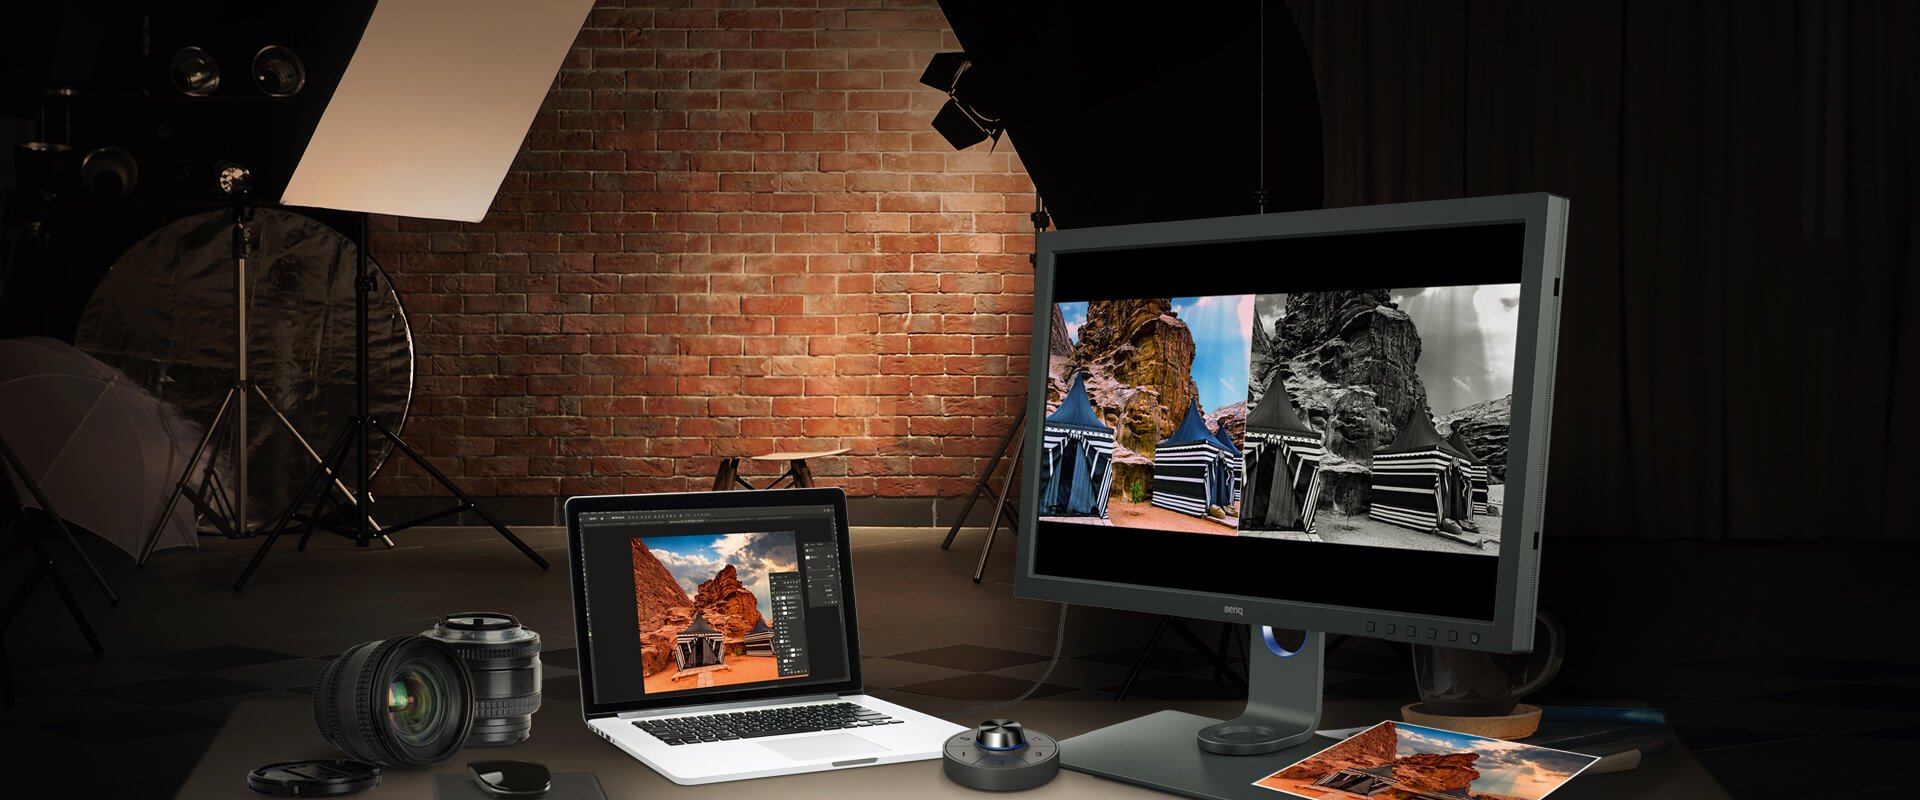 benq professional productivity and efficiency boosts simplify photo retouching and video editing